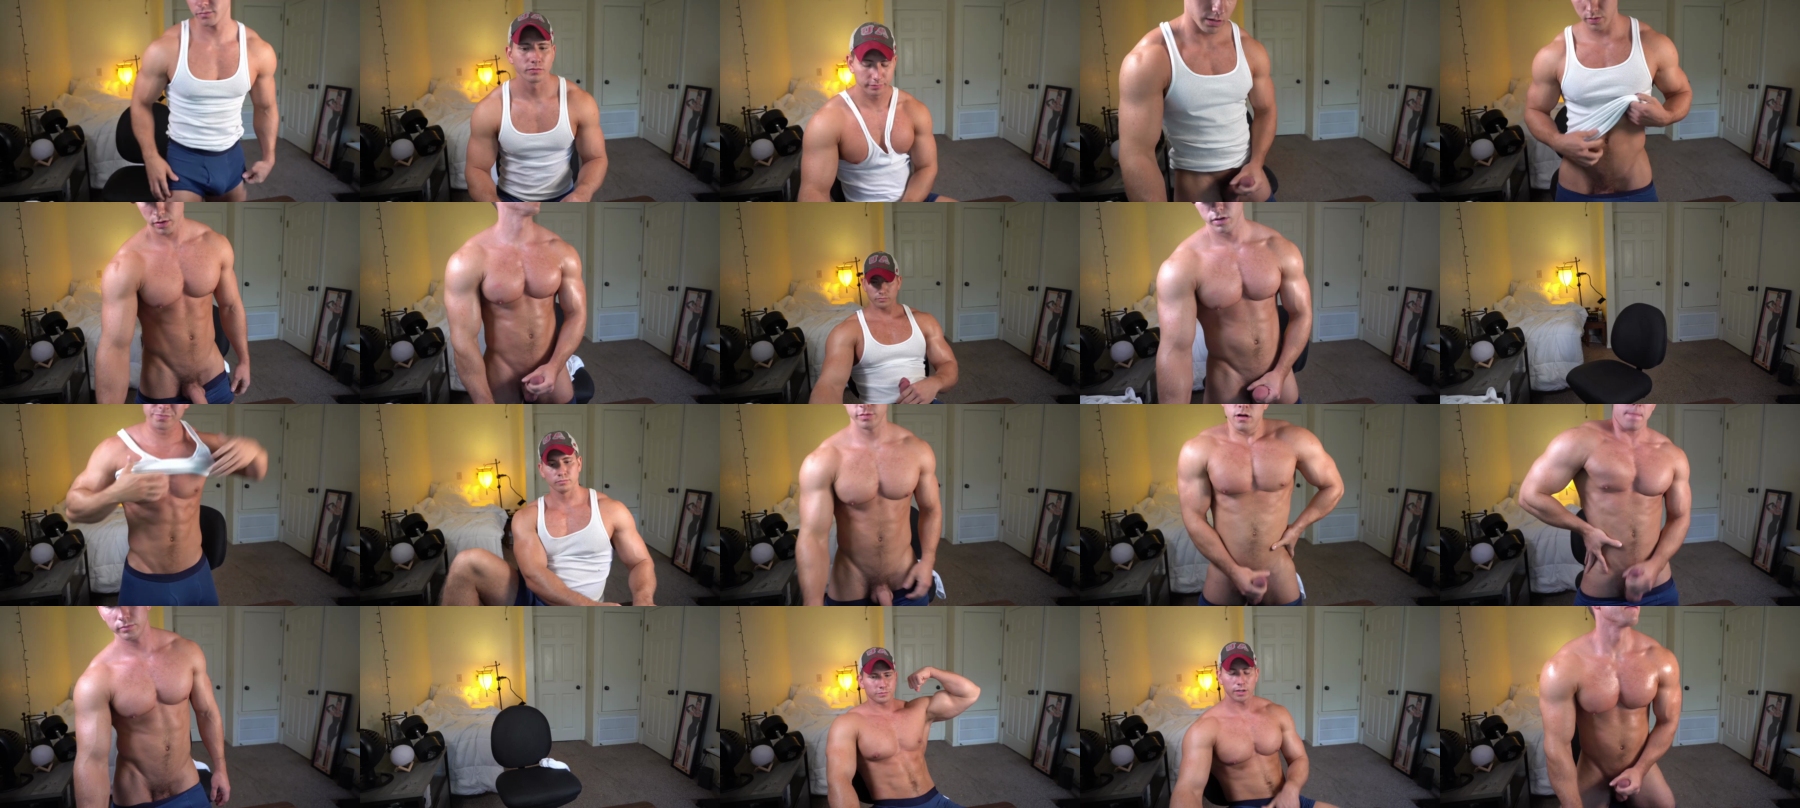 Hotmuscles6t9 Show CAM SHOW @ Chaturbate 10-07-2021